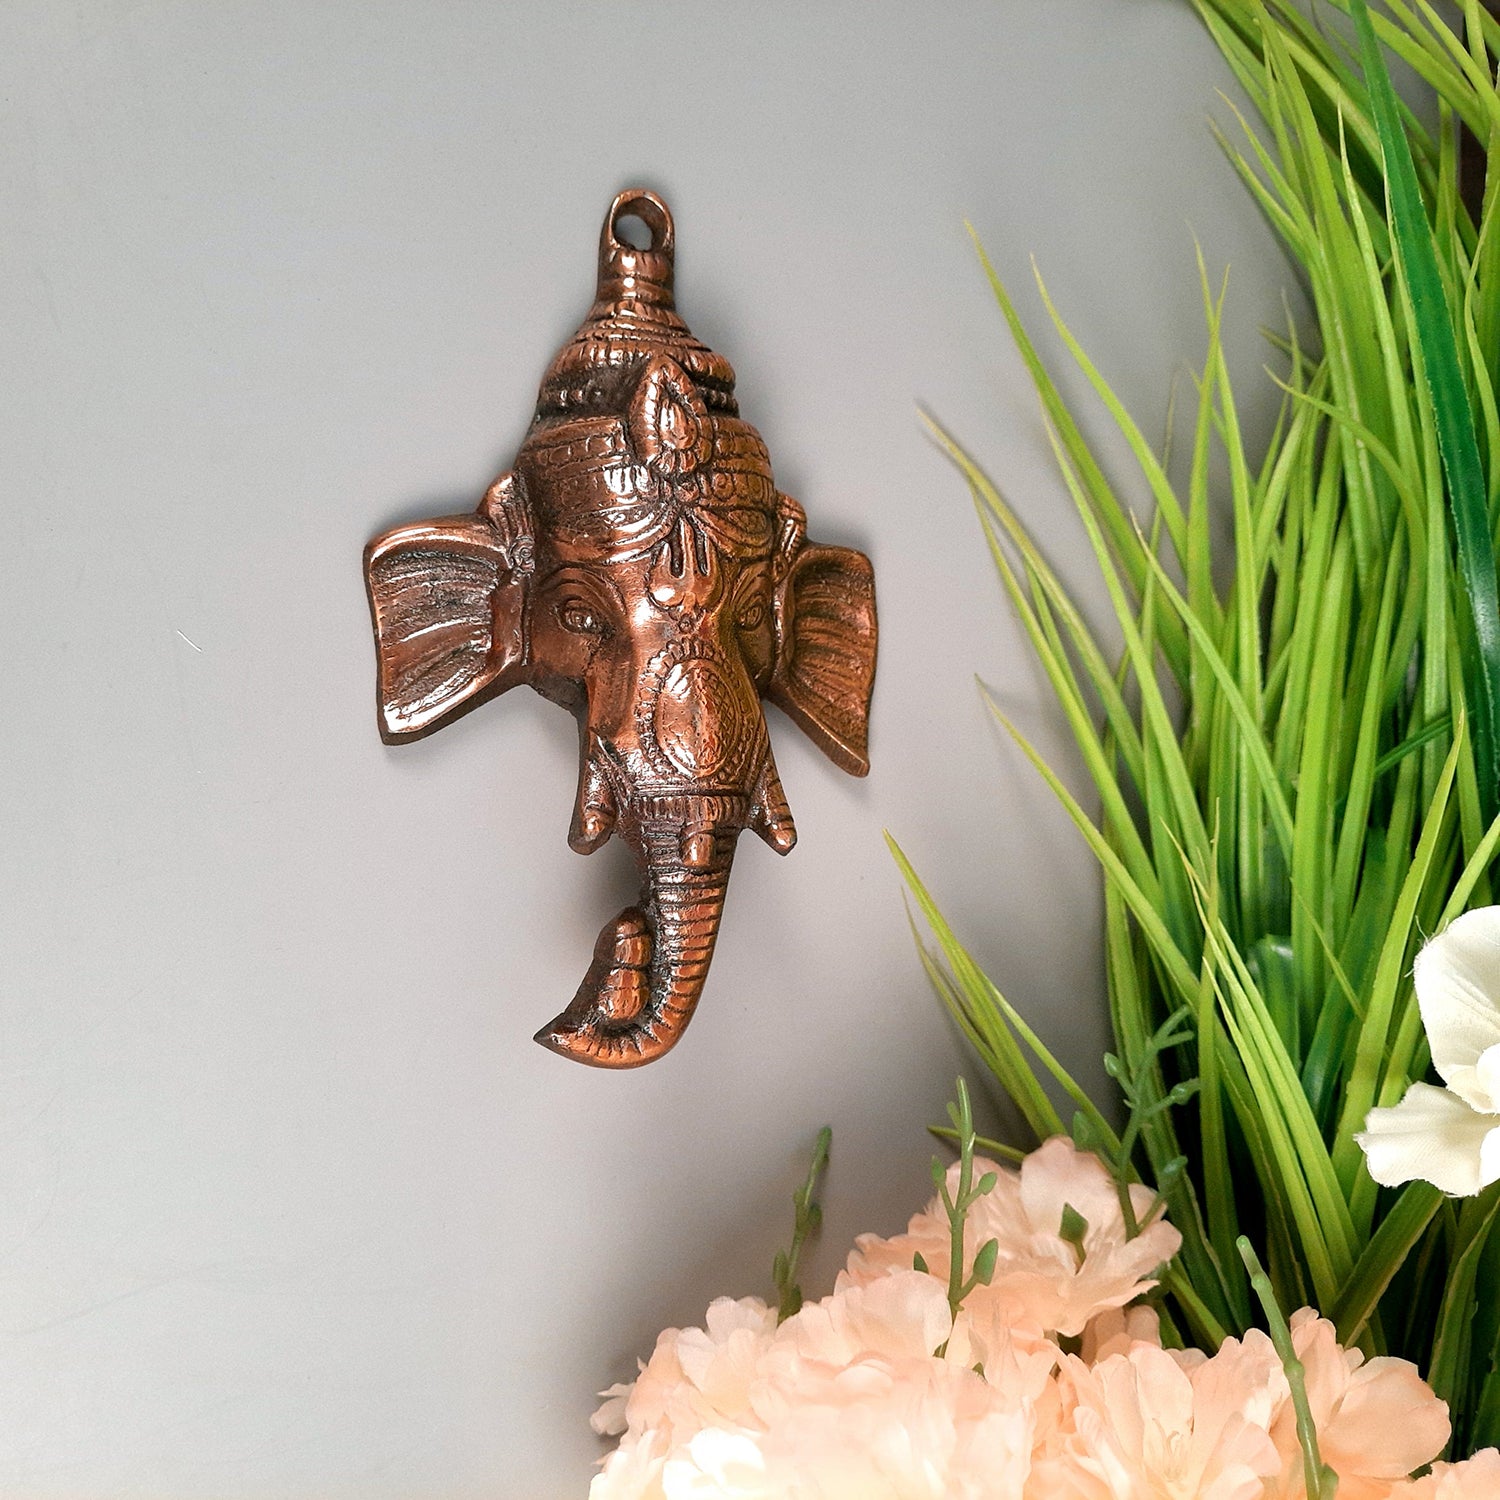 Ganesh Wall Hanging Idol | Lord Ganesha Face Wall Statue Decor - For Puja, Home & Entrance Living Room & Gift - 7 Inch - Apkamart